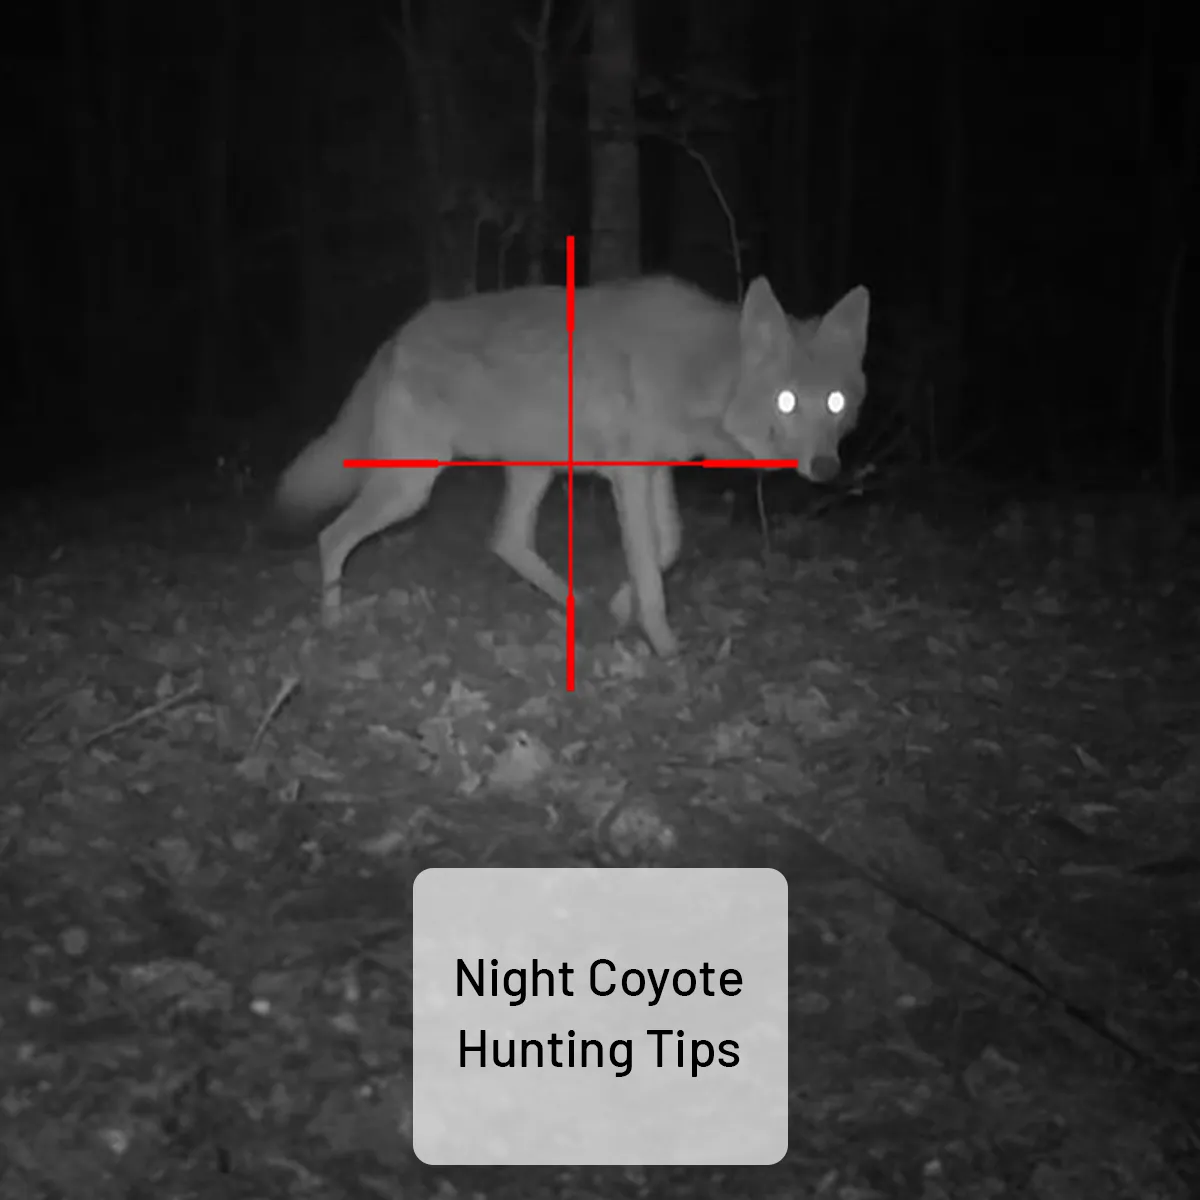 Night coyote hunting tips